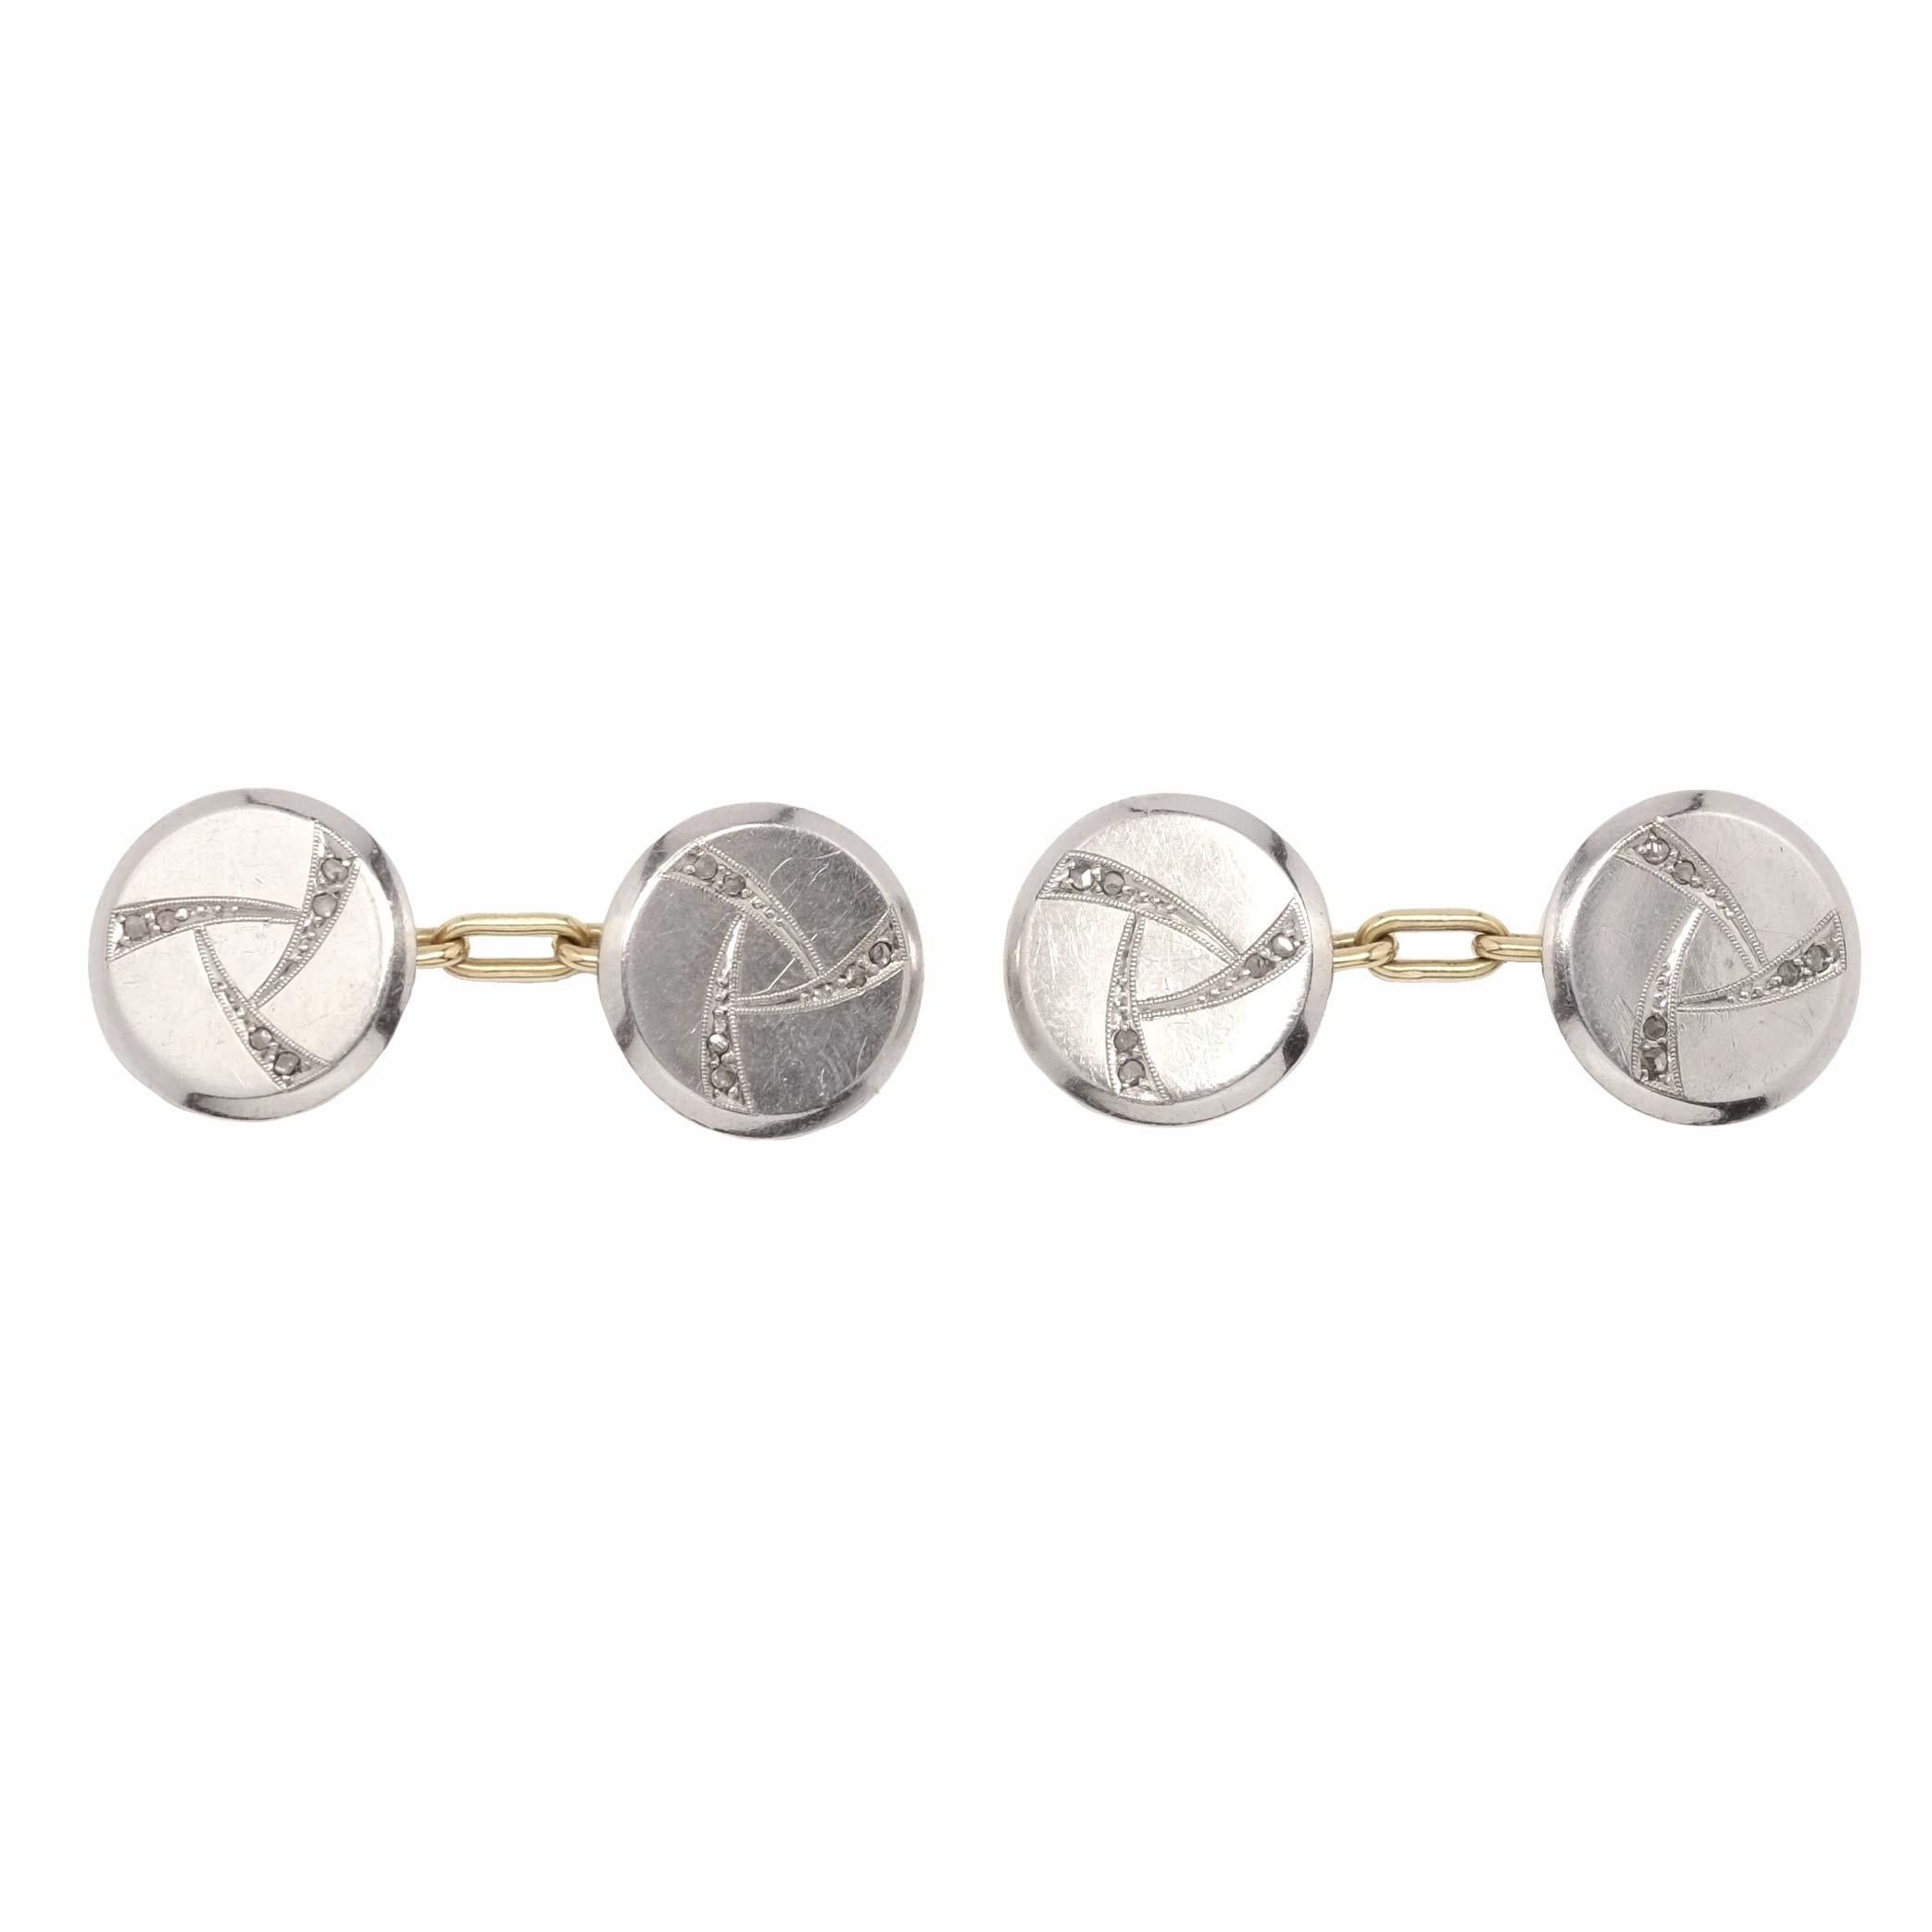 Cufflinks from the 1930s, probably of French manufacture. Set in gold and diamonds, the typical Art Deco traits are clearly legible. In this period artists were interested in ancient geometric shapes and in these cufflinks this love is translated